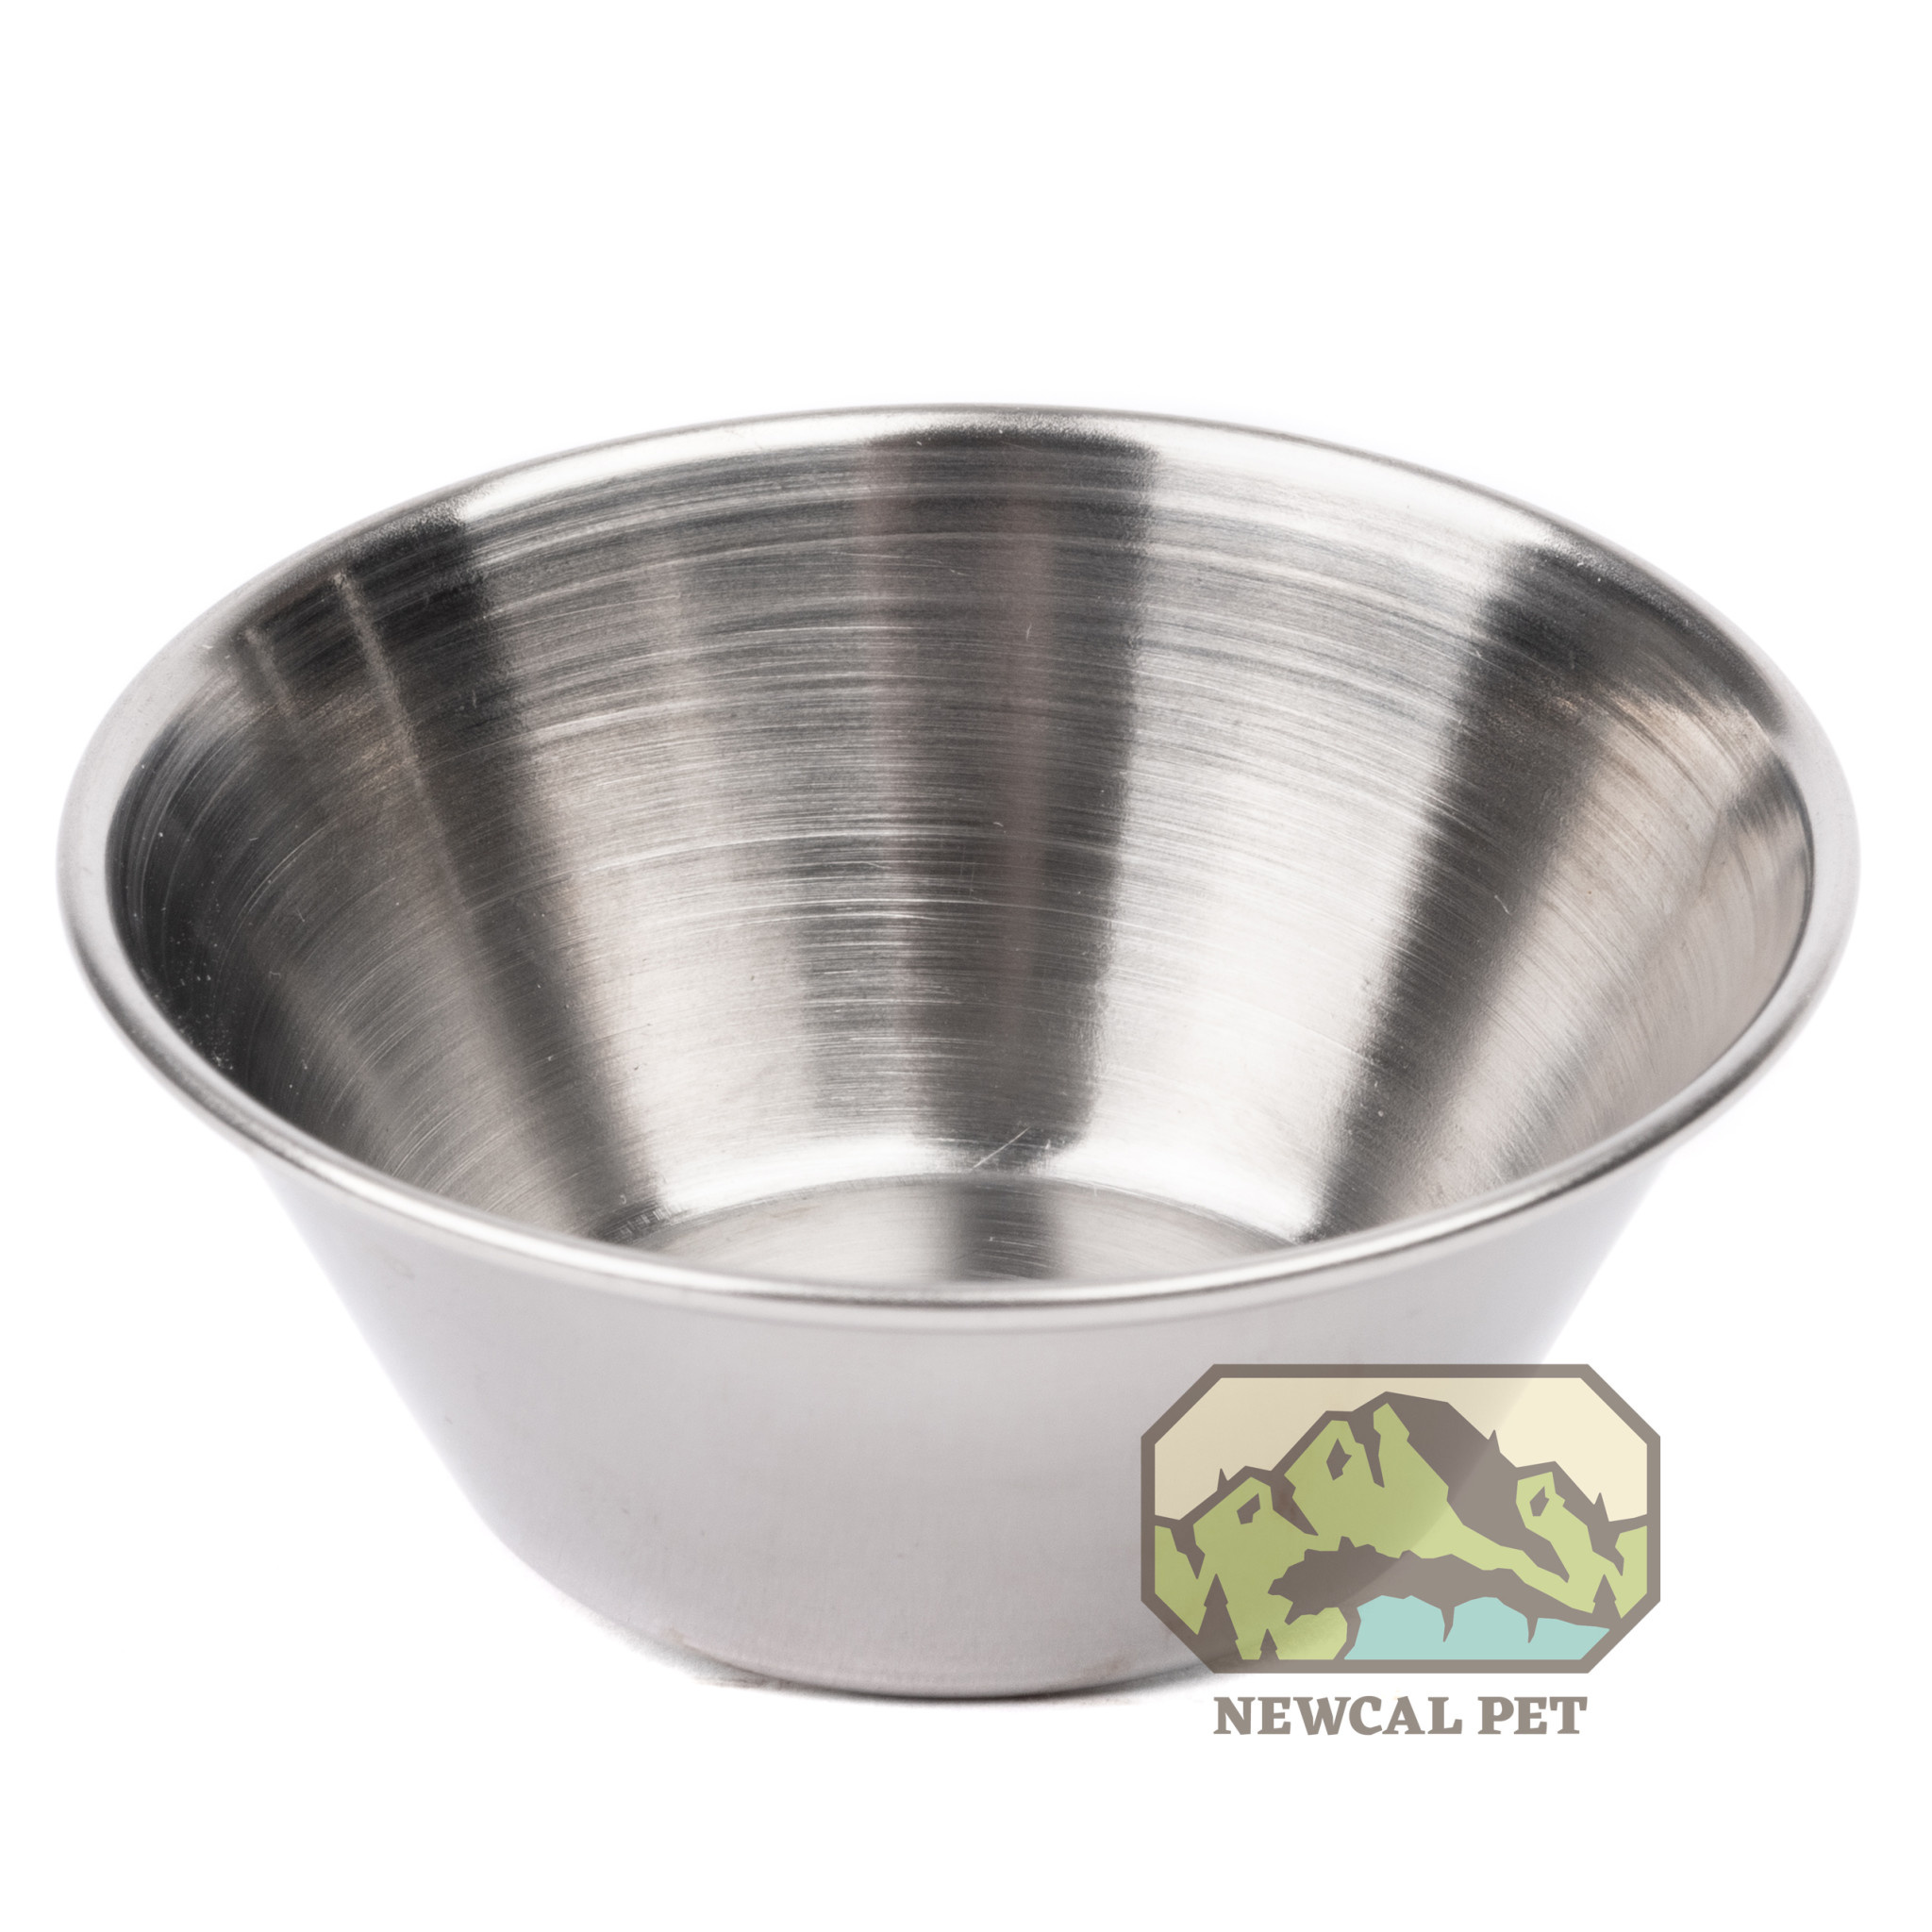 NewCal Pets 1.5oz Stainless Steel Feeding Cup